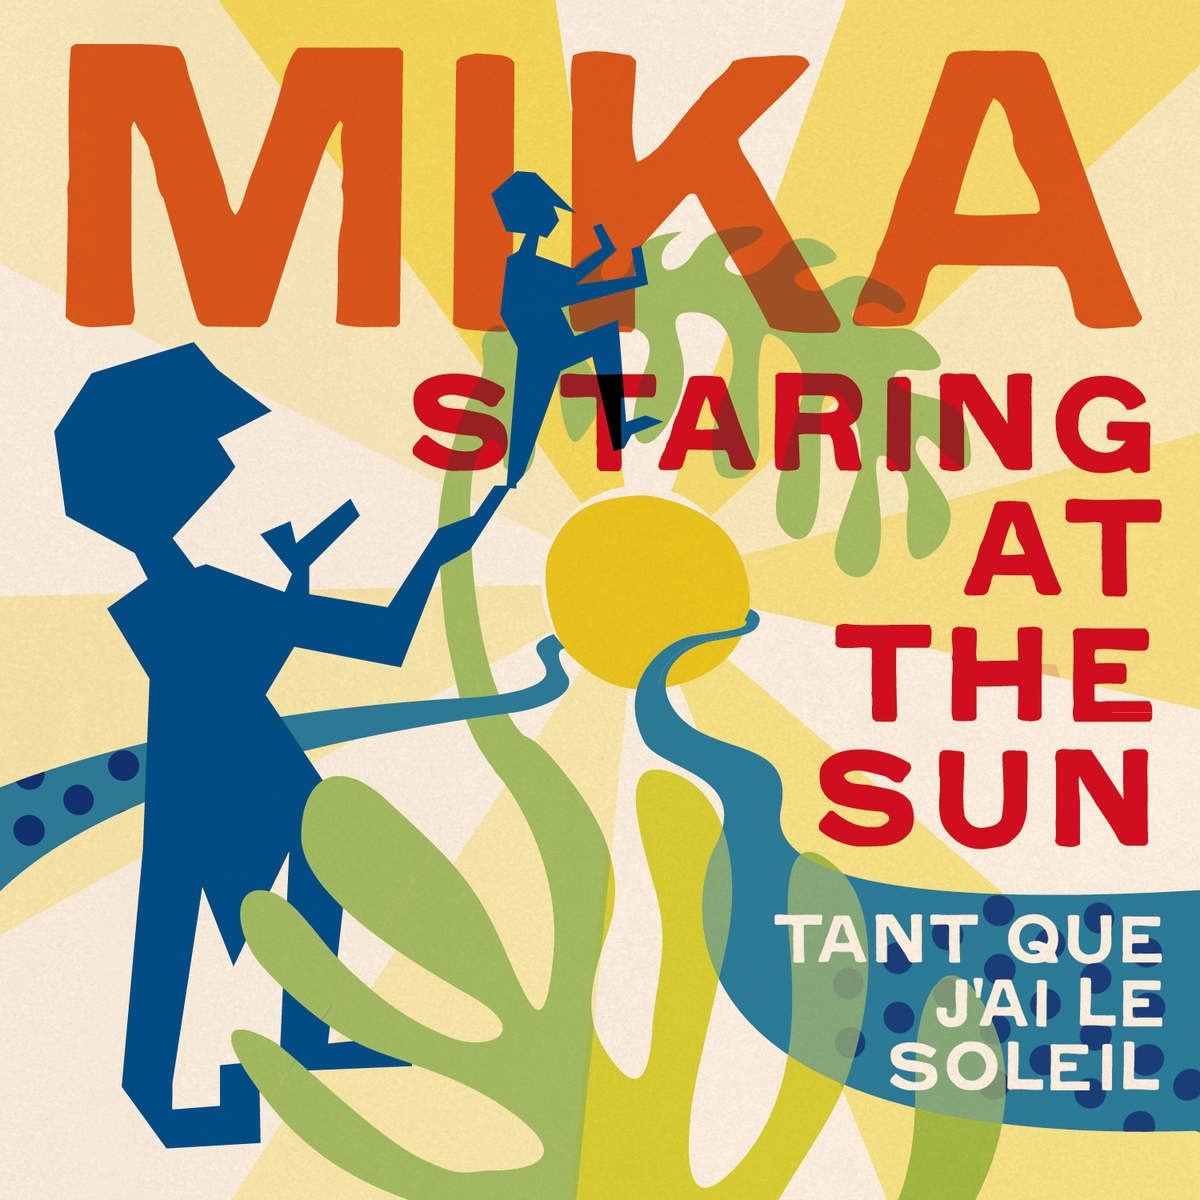 Staring At the Sun (Tant que j'ai le soleil) [French Version] 